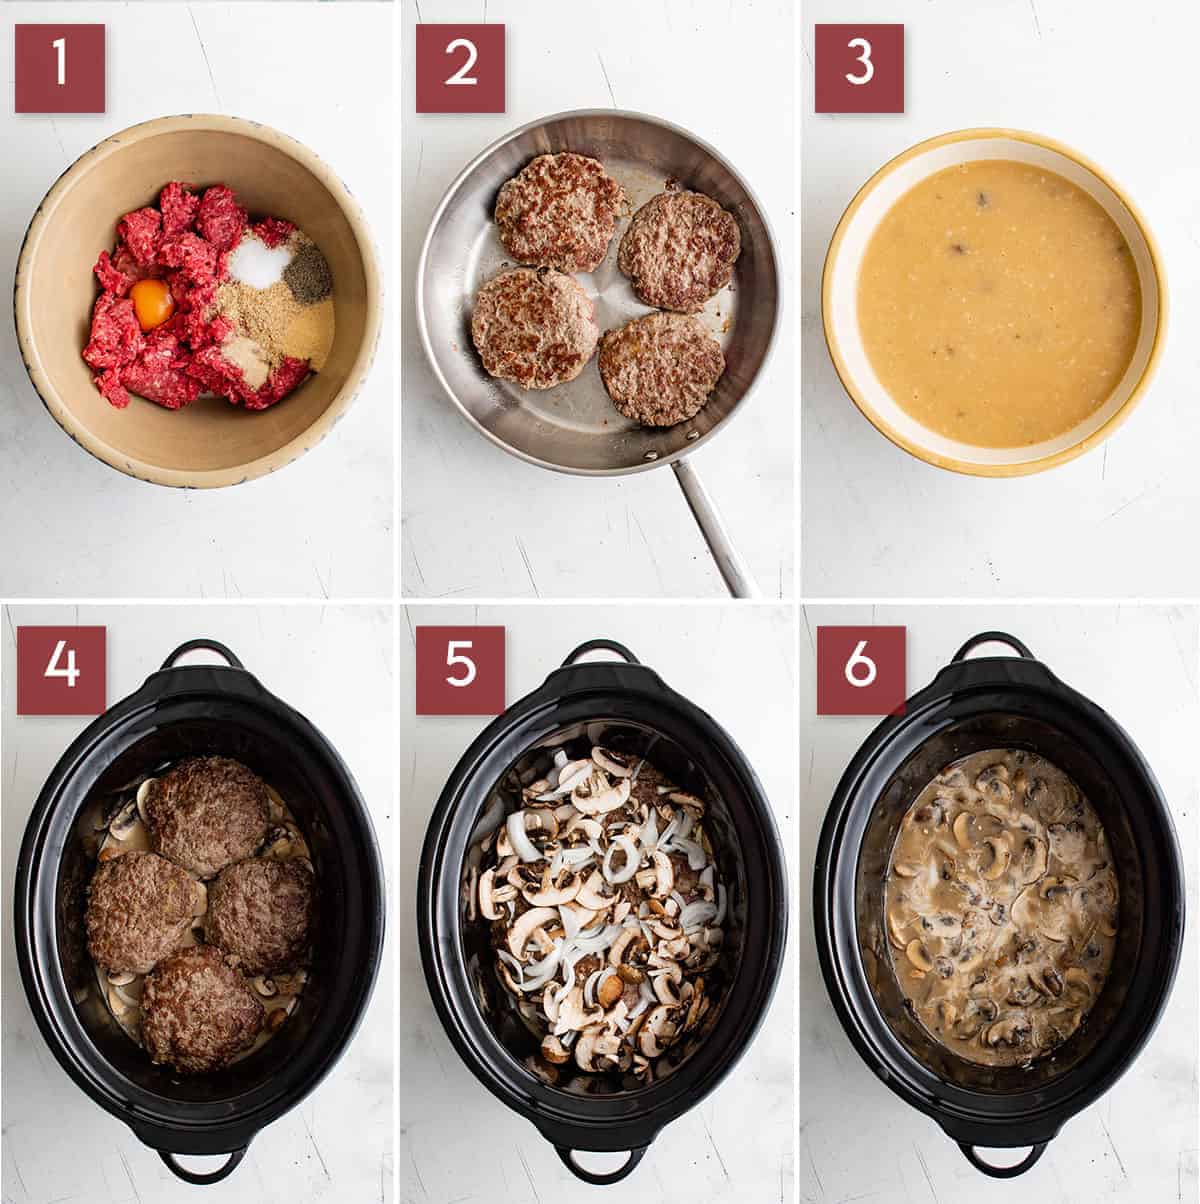 A six panel collage image depicting key steps of making The Salty Marshmallow's Crockpot Salisbury Steak recipe in bird's eye view. In the first panel, the raw ingredients of ground beef, egg, and seasoning is in a bowl. The second panel shows the formed beef patties cooking on a skillet. The third panel shows the liquid the steaks will cook in. The fourth panel shows the seared patties in a large crockpot. The fifth panel shows sliced onions and mushrooms atop the beef patties. The sixth and final panel shows the the sauce poured over the top of the patties and onion/mushroom mixture. 